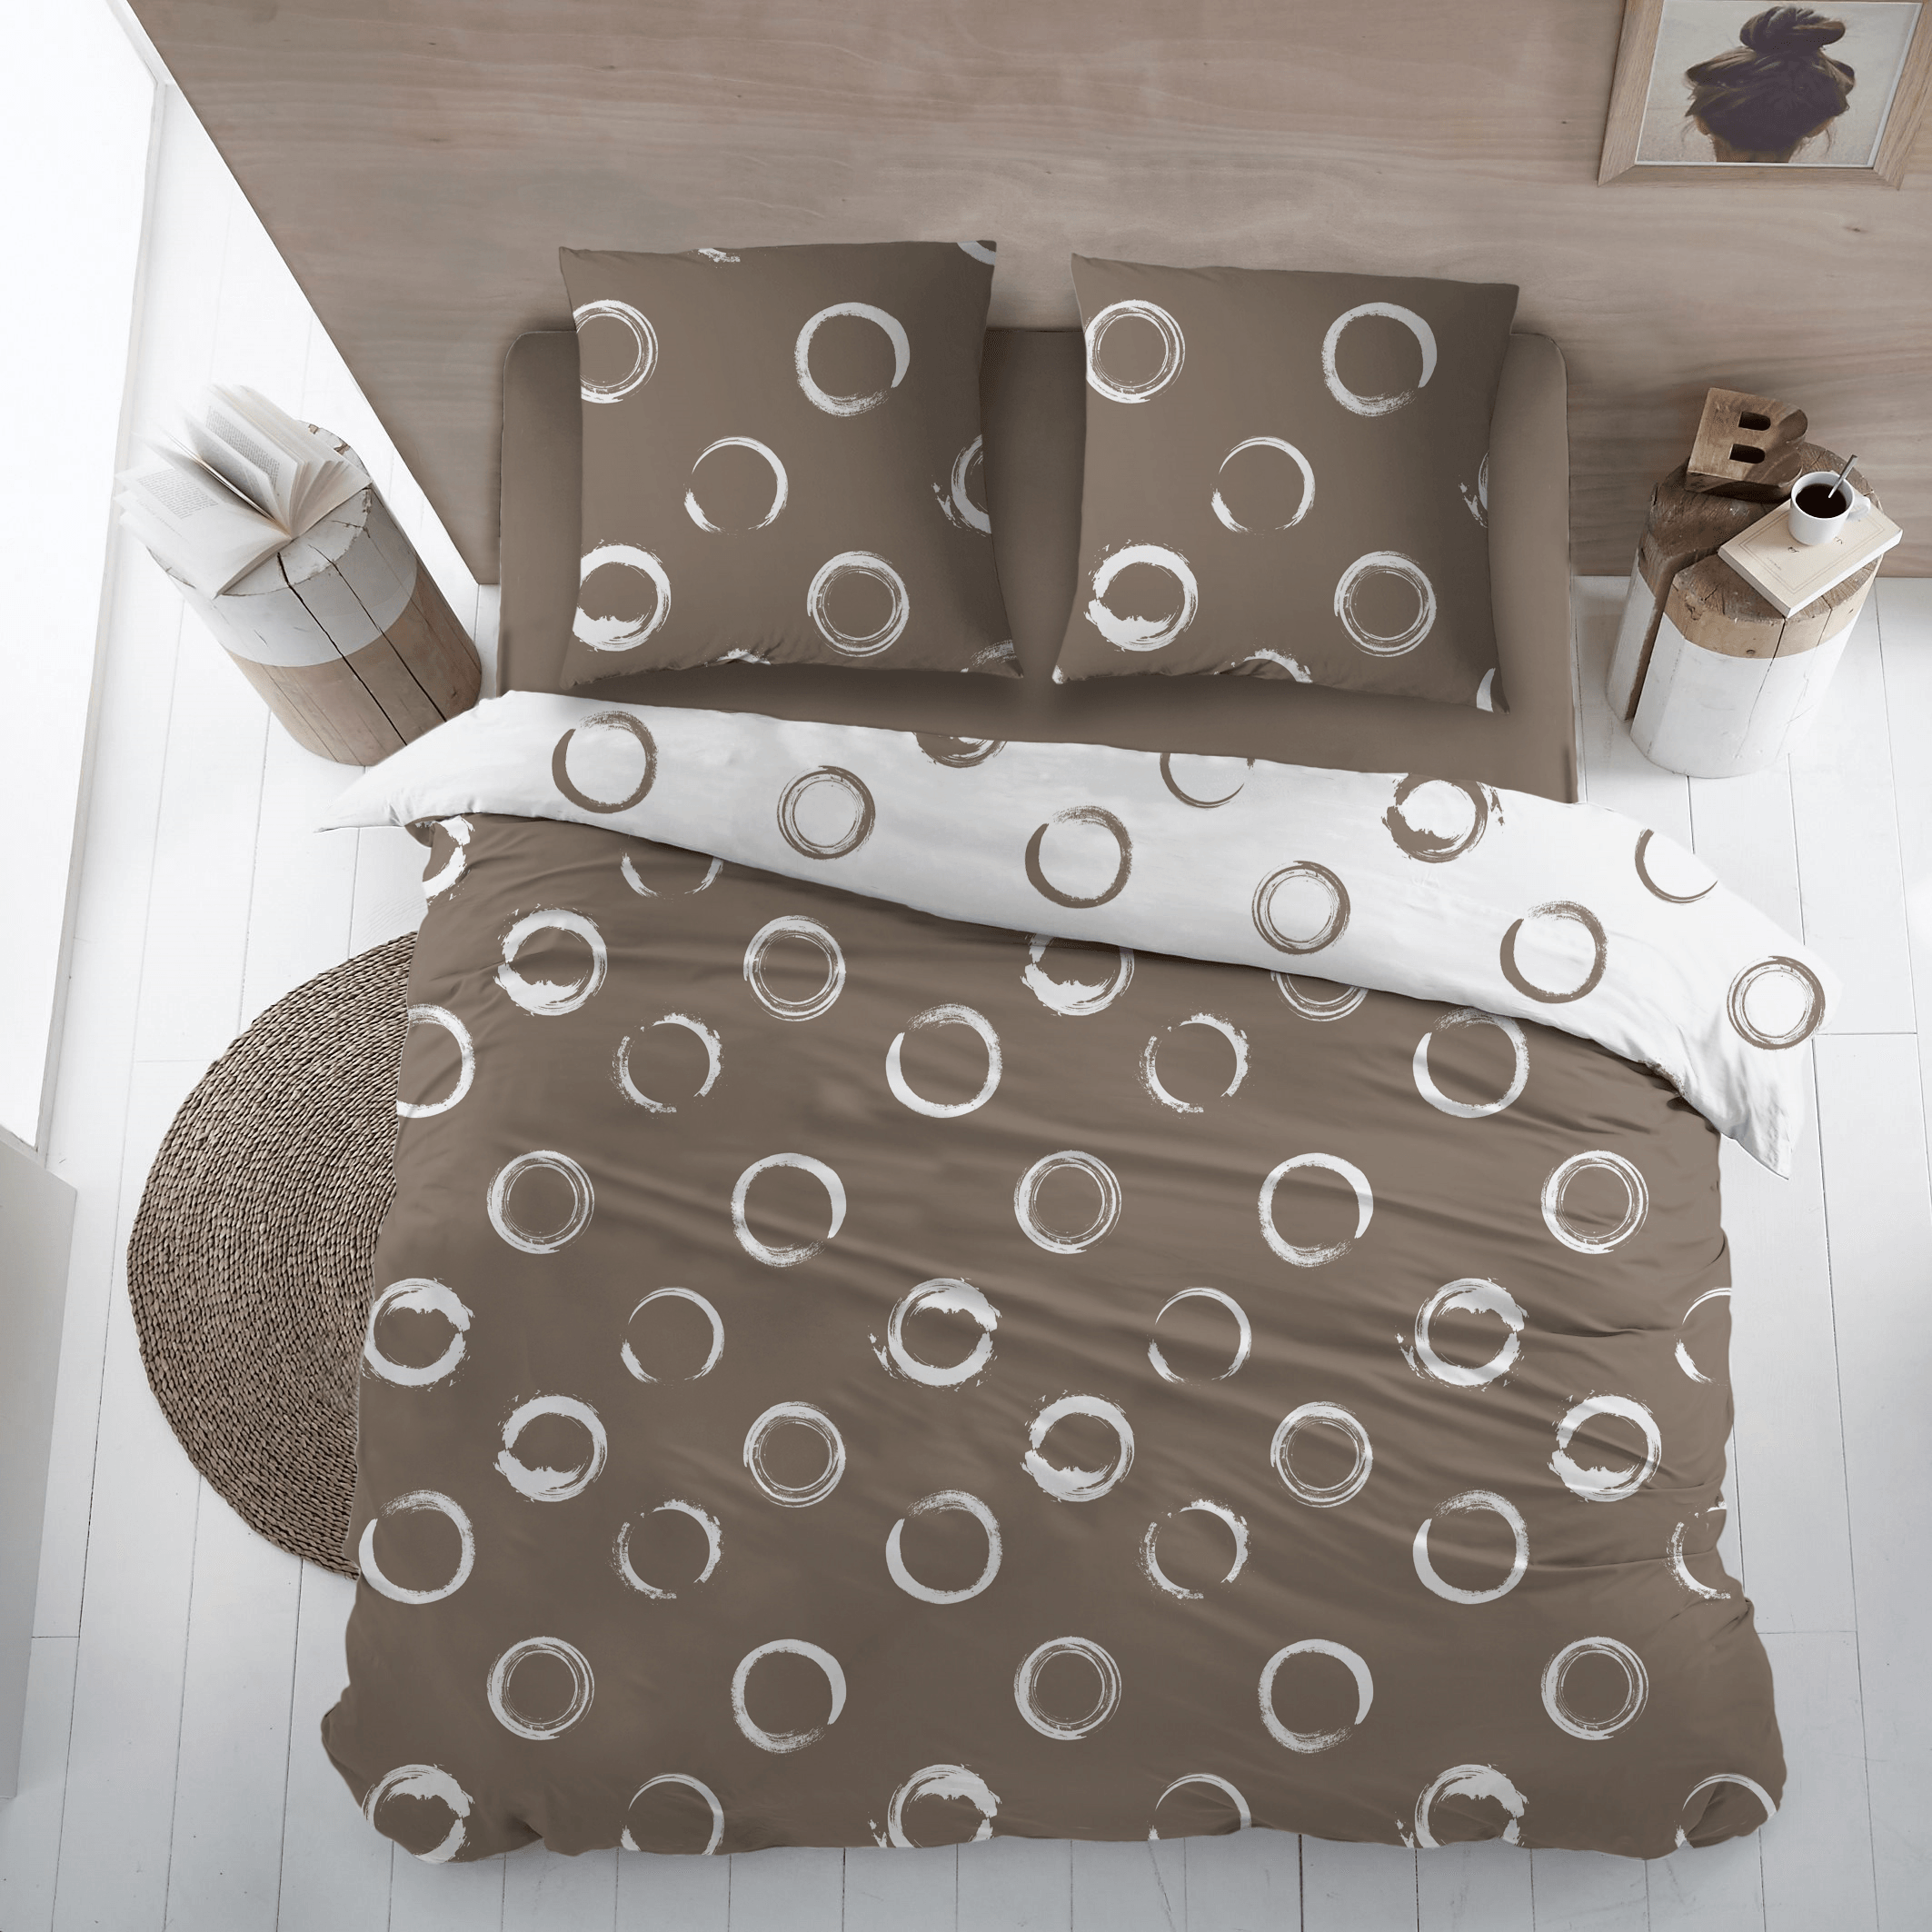 Cottons Lakenset Lieve Taupe Flanel - Bedtextielonline.be